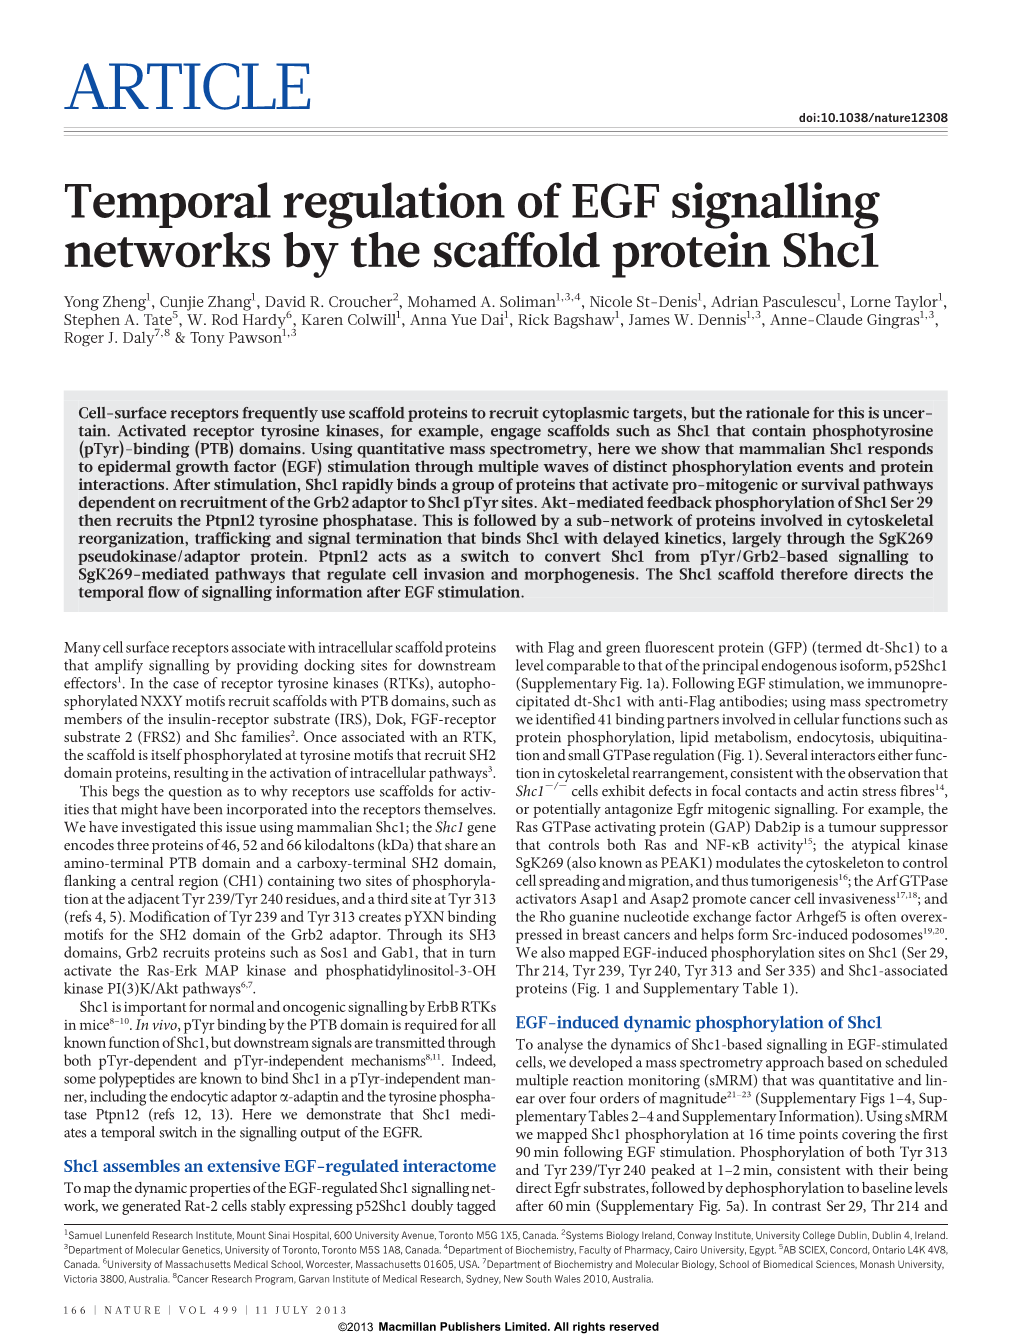 Temporal Regulation of EGF Signalling Networks by the Scaffold Protein Shc1